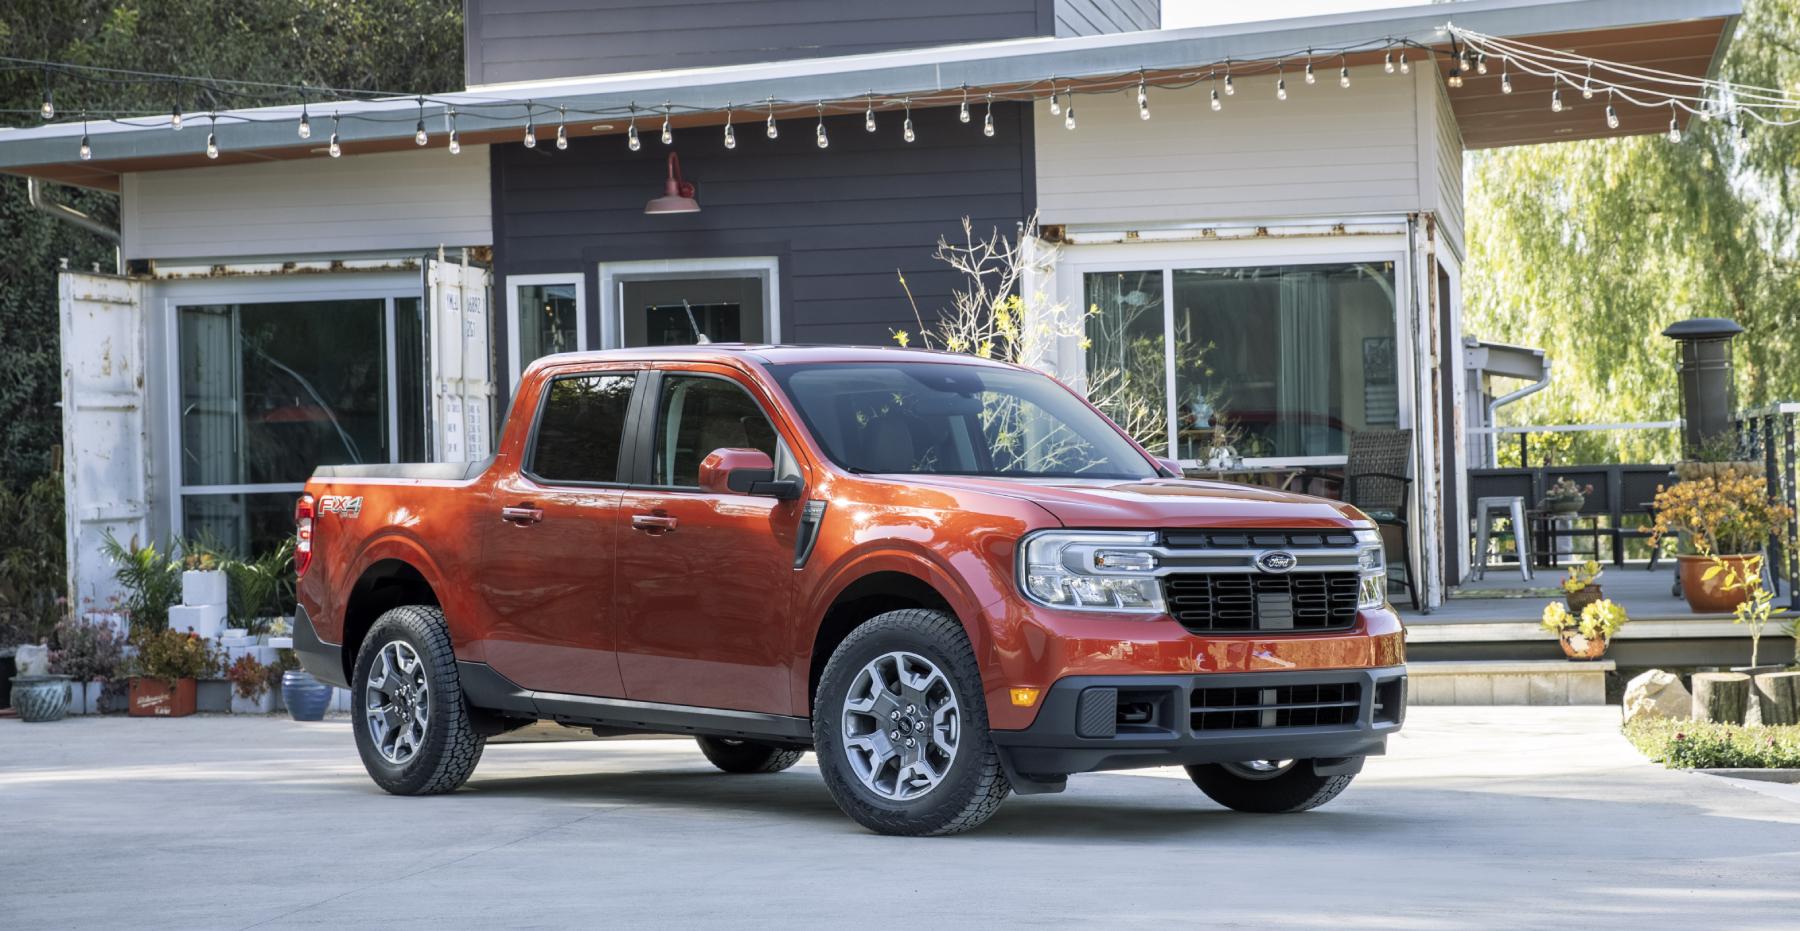 The 2022 Ford Maverick is one of the most anticipated new trucks in a long time.